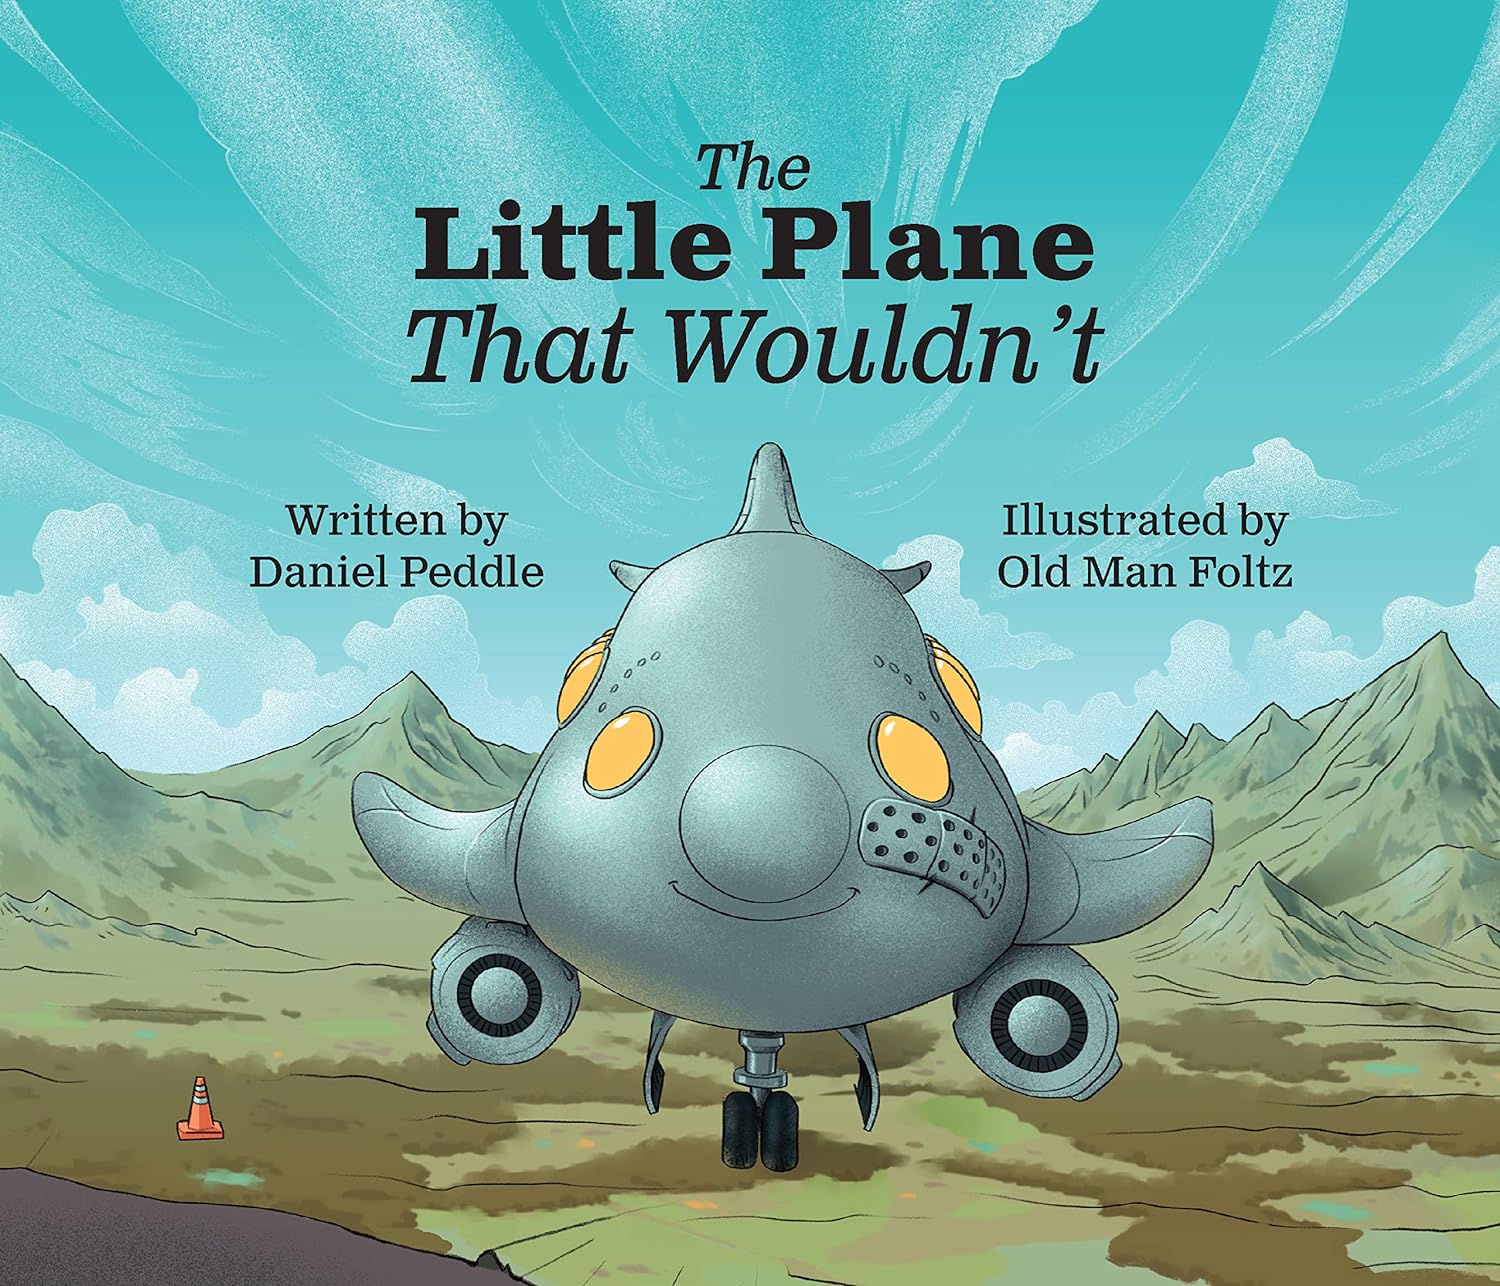 The Little Plane That Wouldn’t